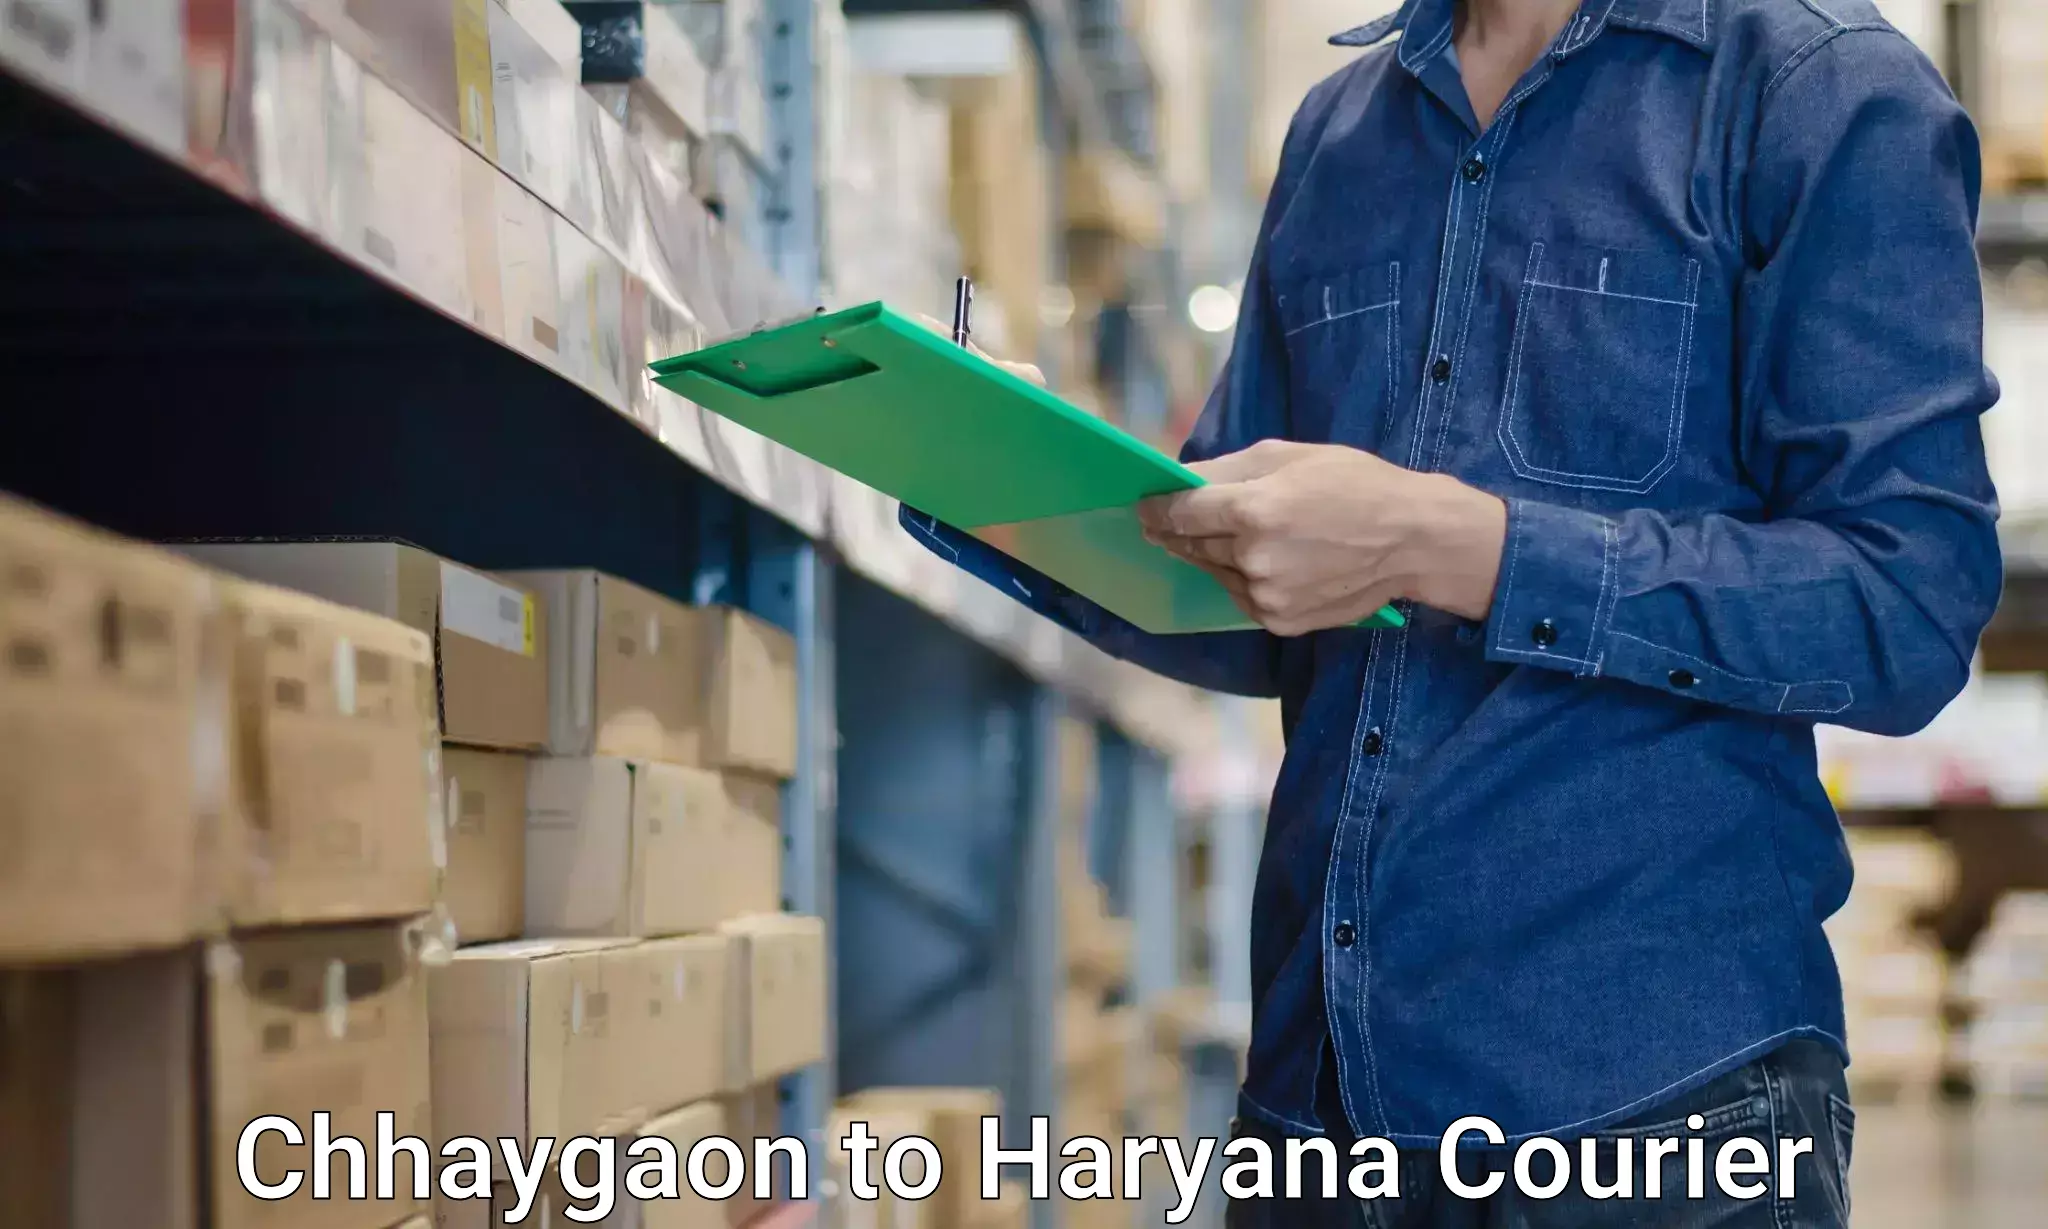 Reliable goods transport Chhaygaon to Hansi